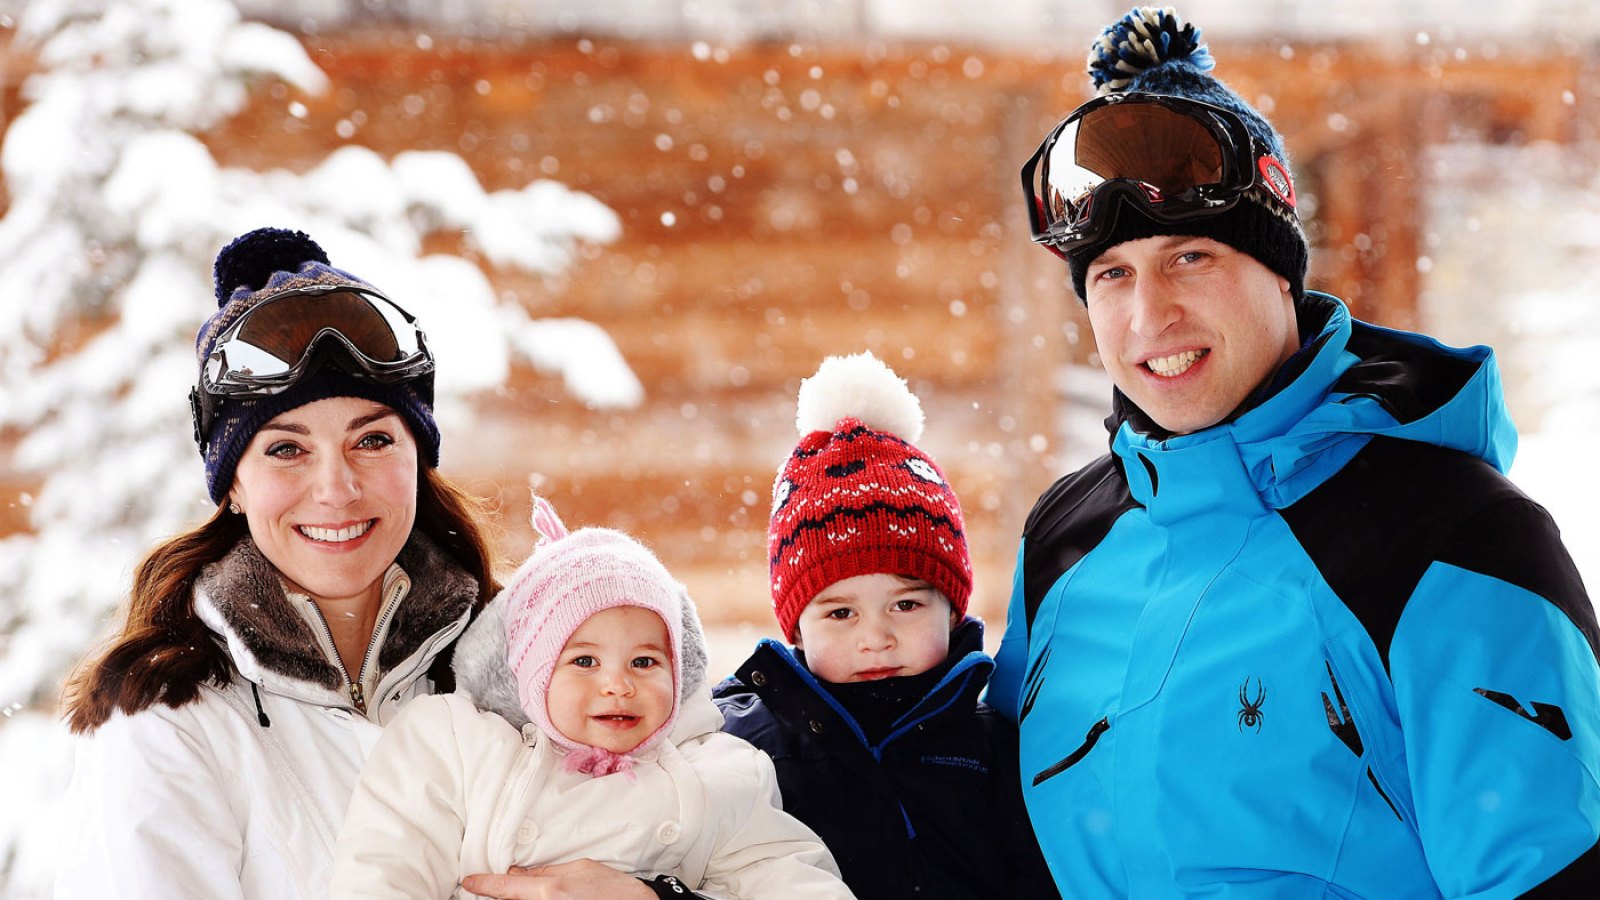 Catherine, Duchess of Cambridge and Prince William, Duke of Cambridge, with their children, Princess Charlotte and Prince George, enjoy a short private skiing break on March 3, 2016 in the French Alps